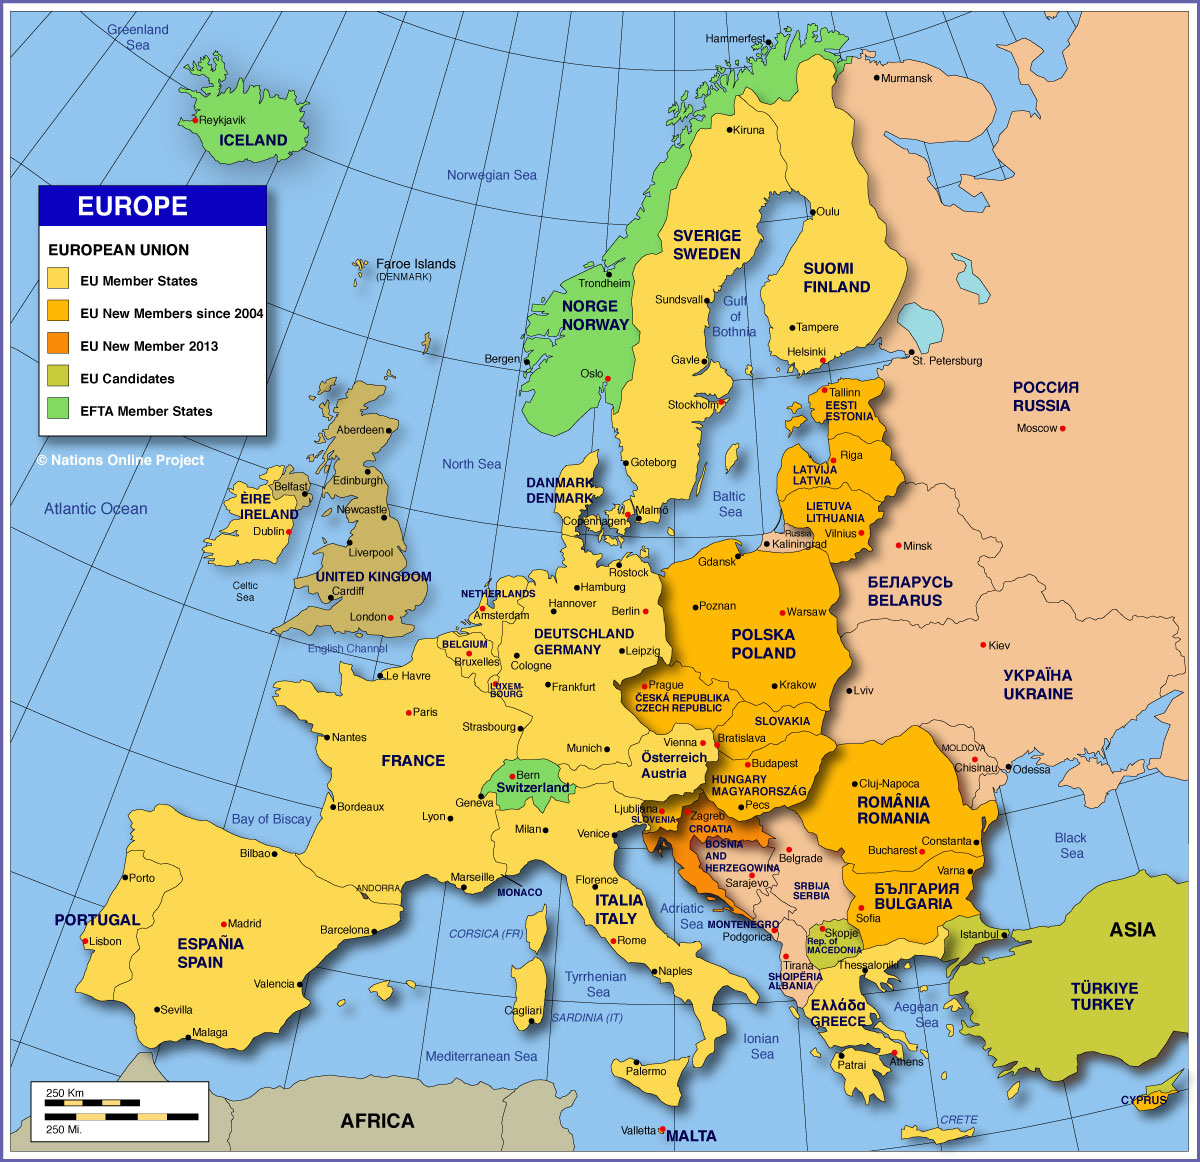 Map of member states of the European Union. See table in text below for text version.